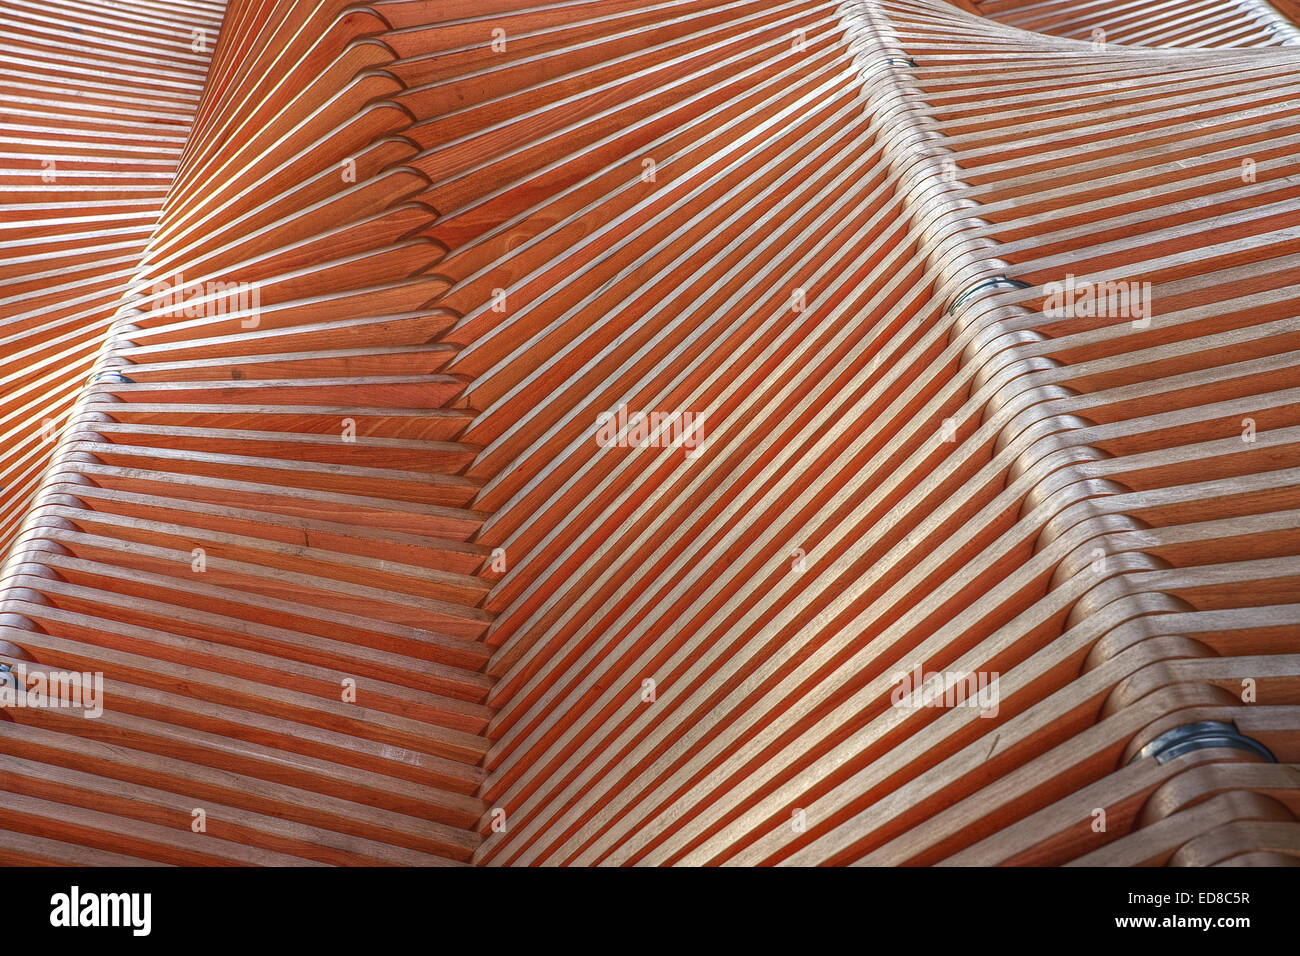 Abstract wooden construction Stock Photo